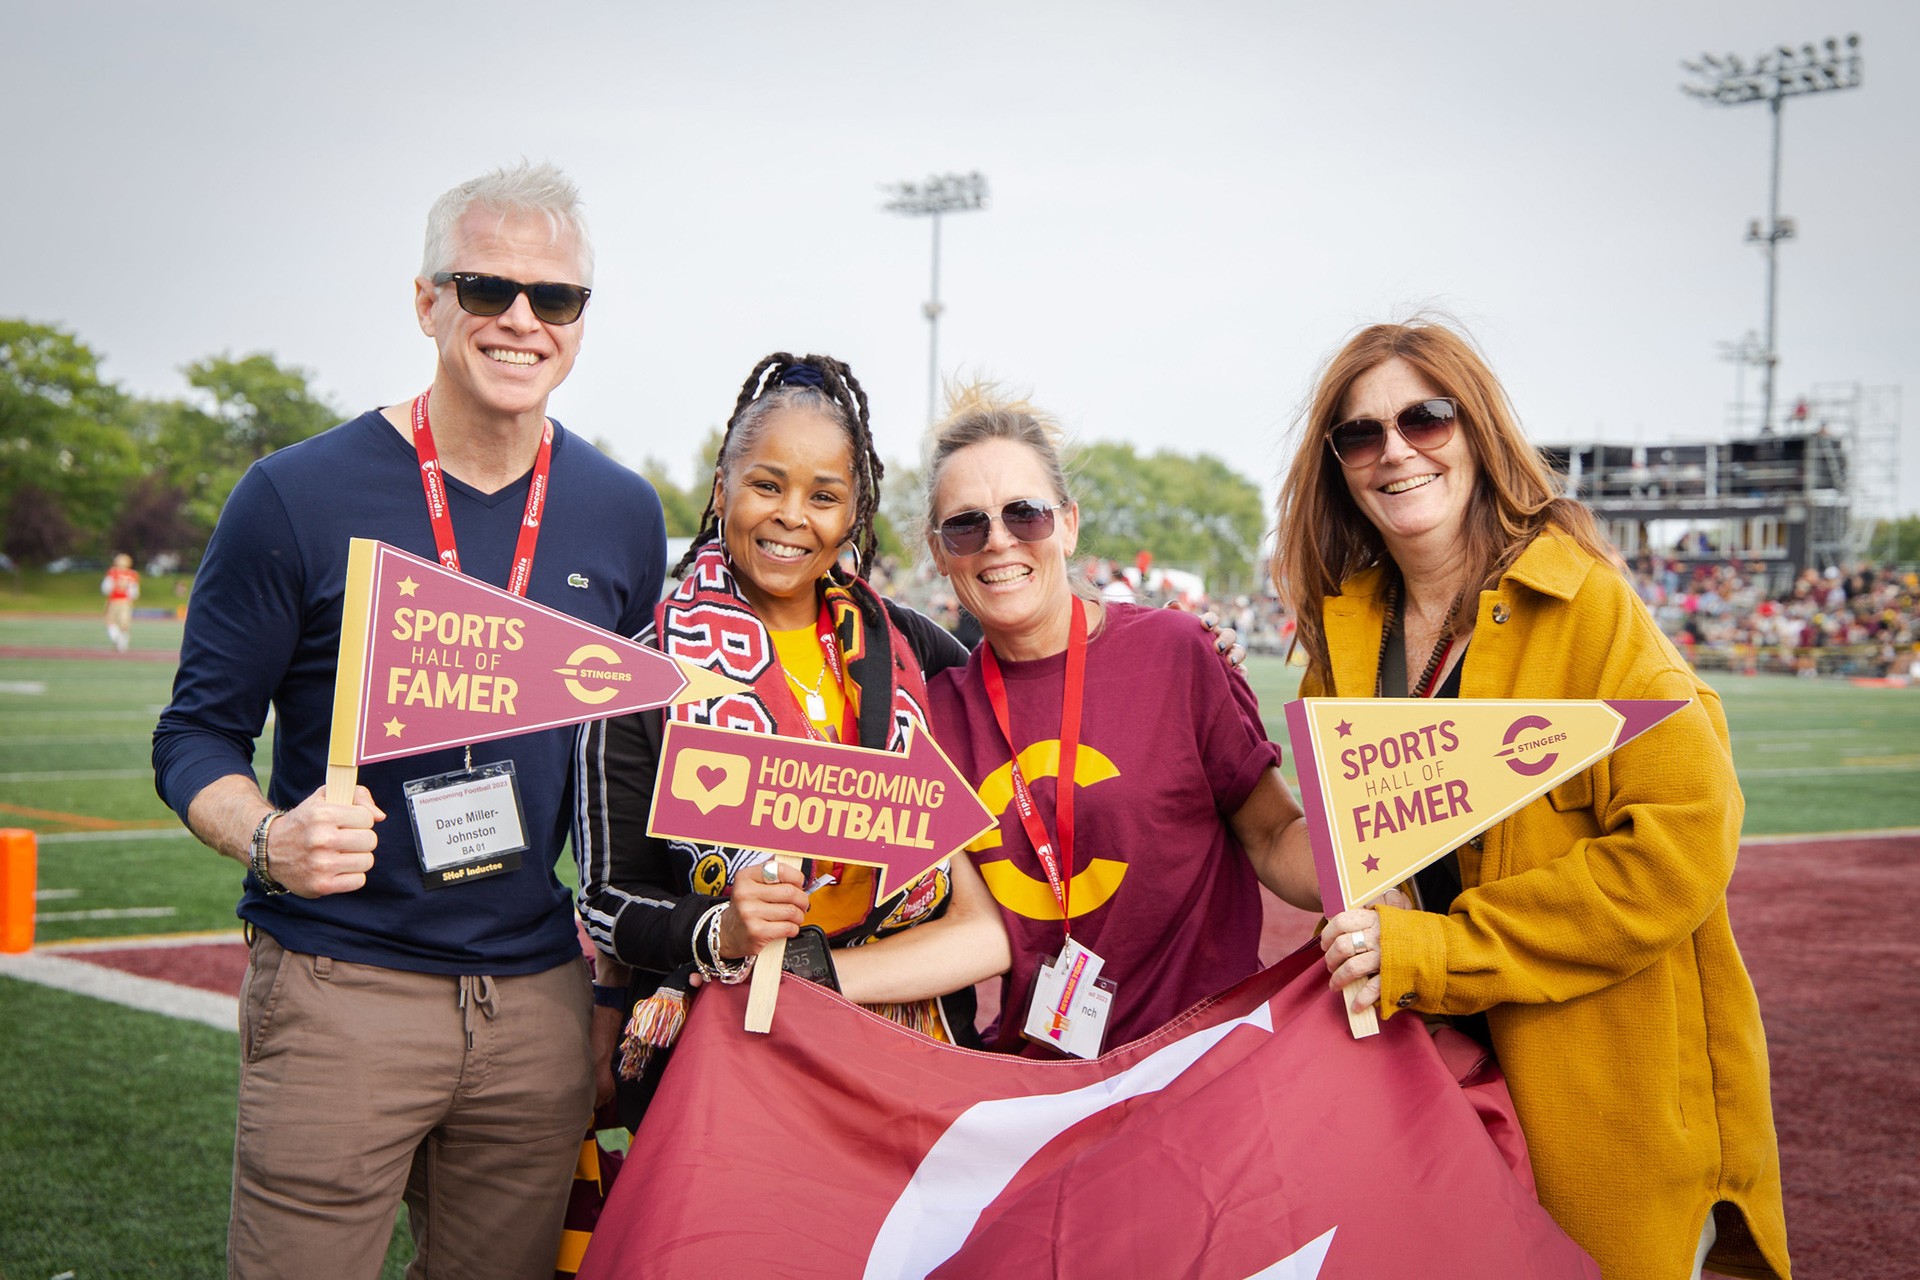 Alumni cheered on the Concordia Stingers at the Homecoming football game on September 23.